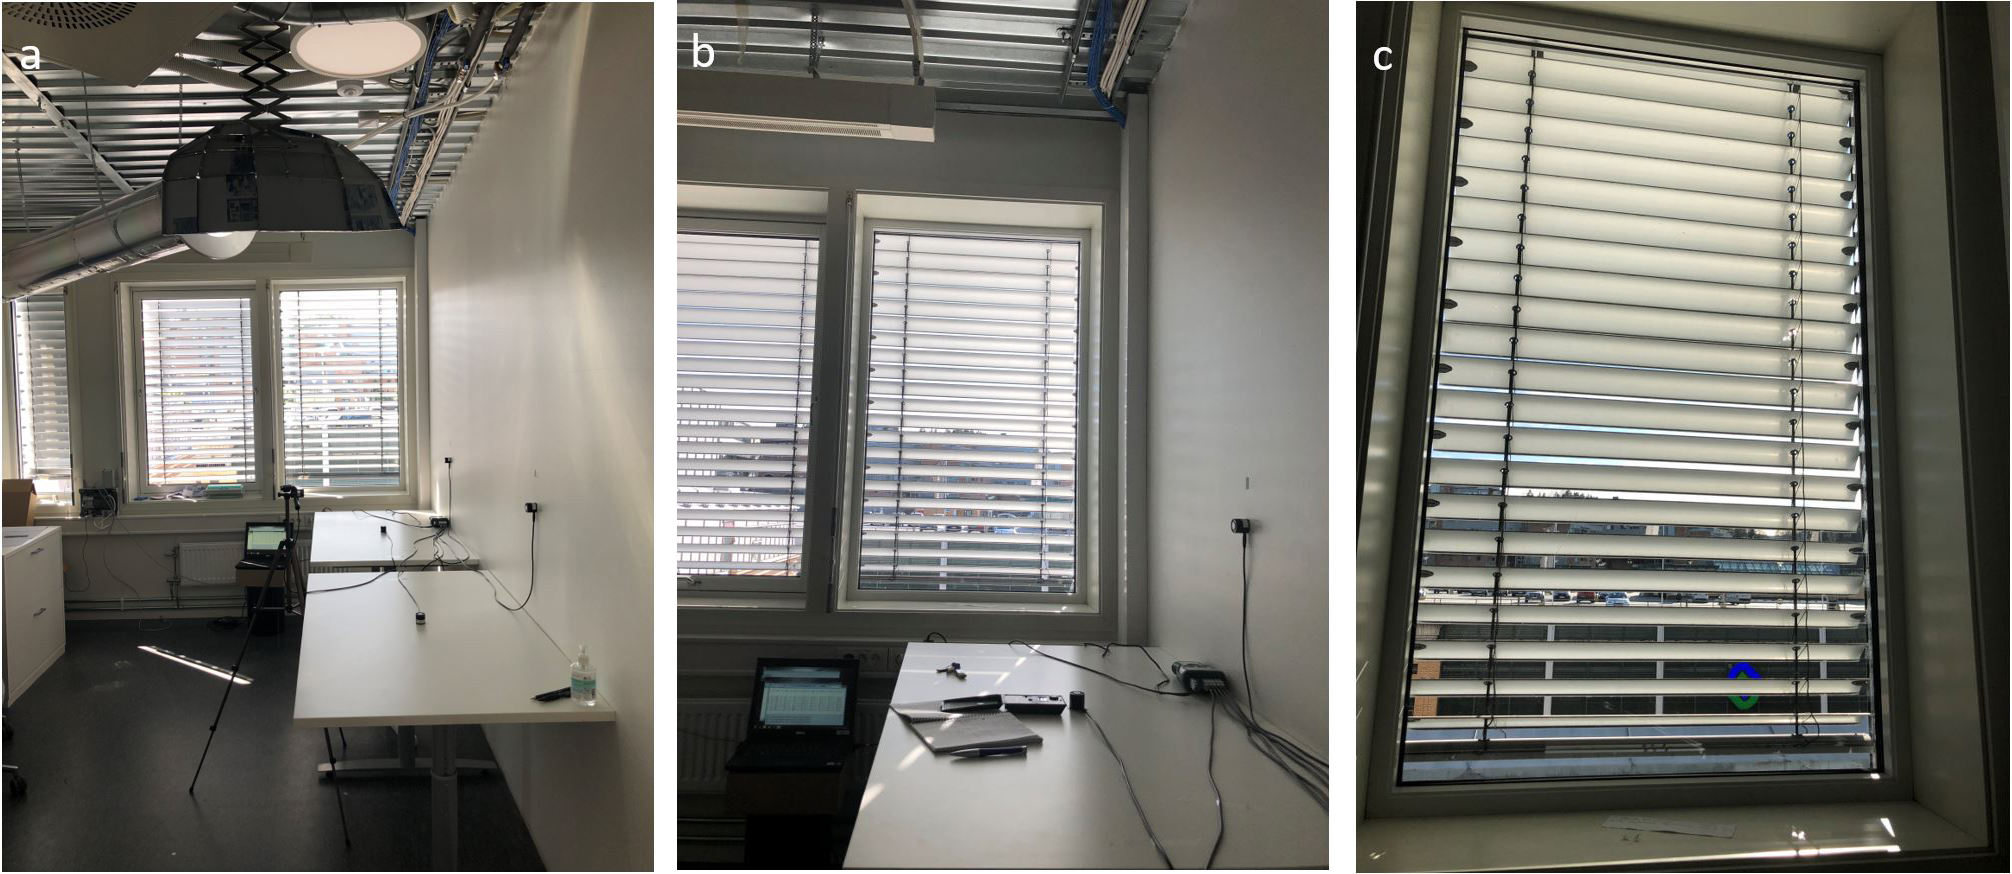 The view against the window and potential for excessive sunlight and glare: from the entrance to the office (a); from the desk 2, closest to the door (b); from the desk 1, closest to the window (c).